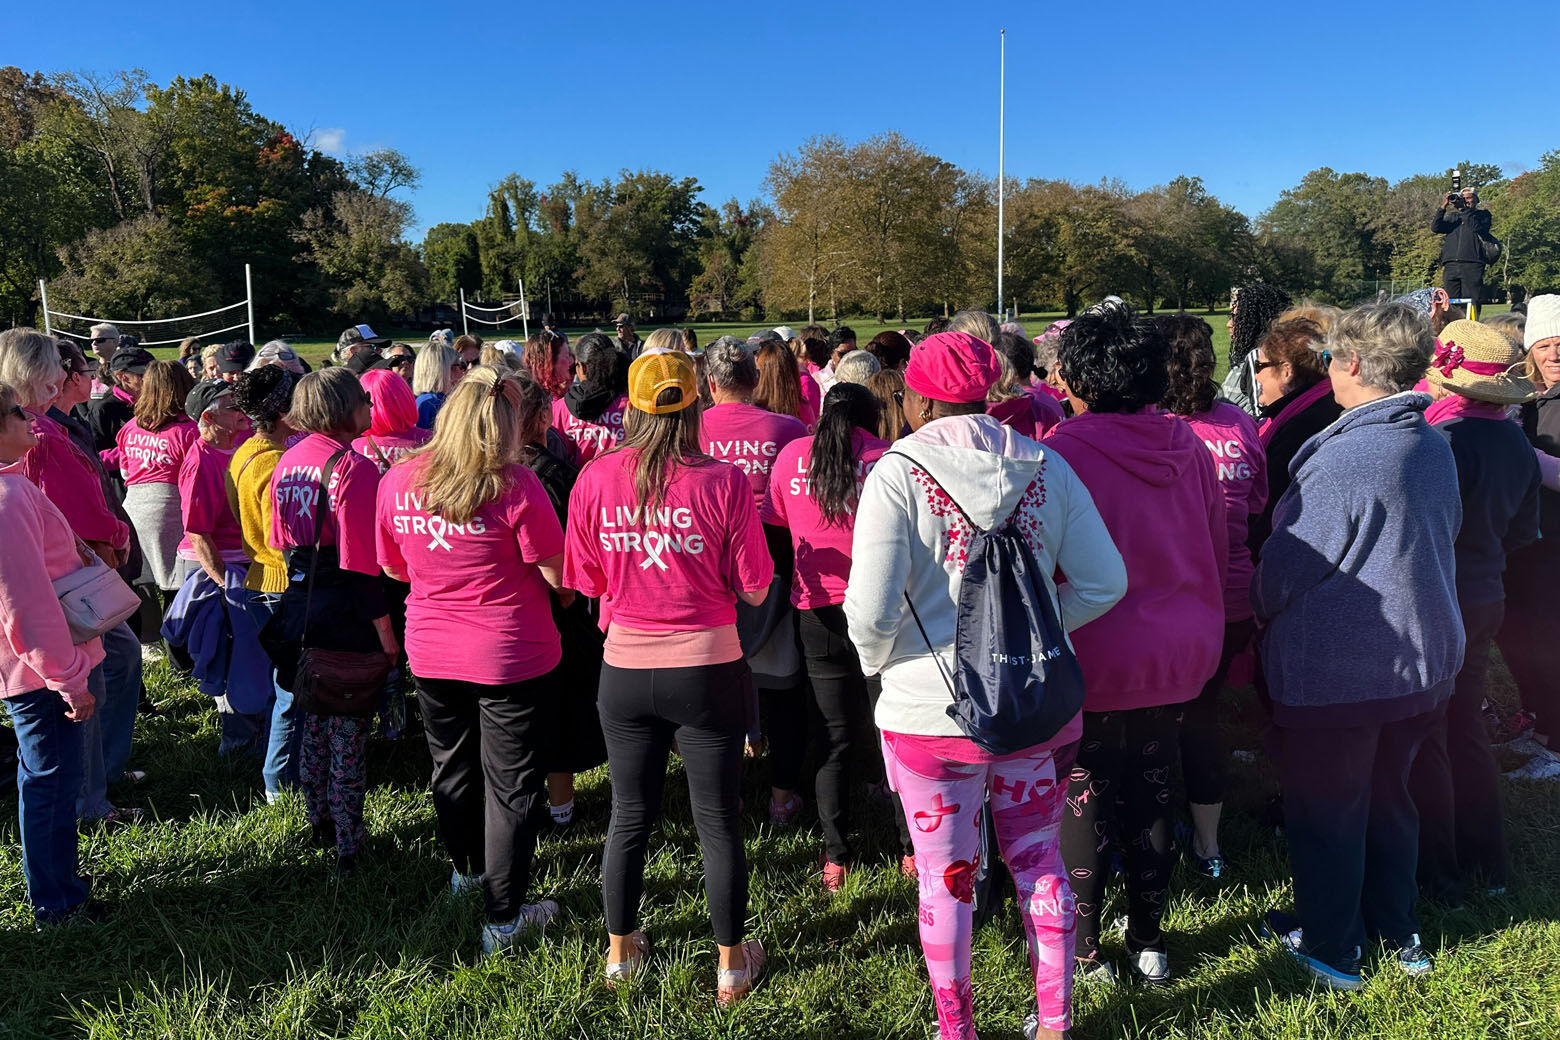 Teams of walkers, including breast cancer survivors, warriors and supporters turned out Sunday for the Walk to Bust Cancer. (WTOP/Cheyenne Corin)